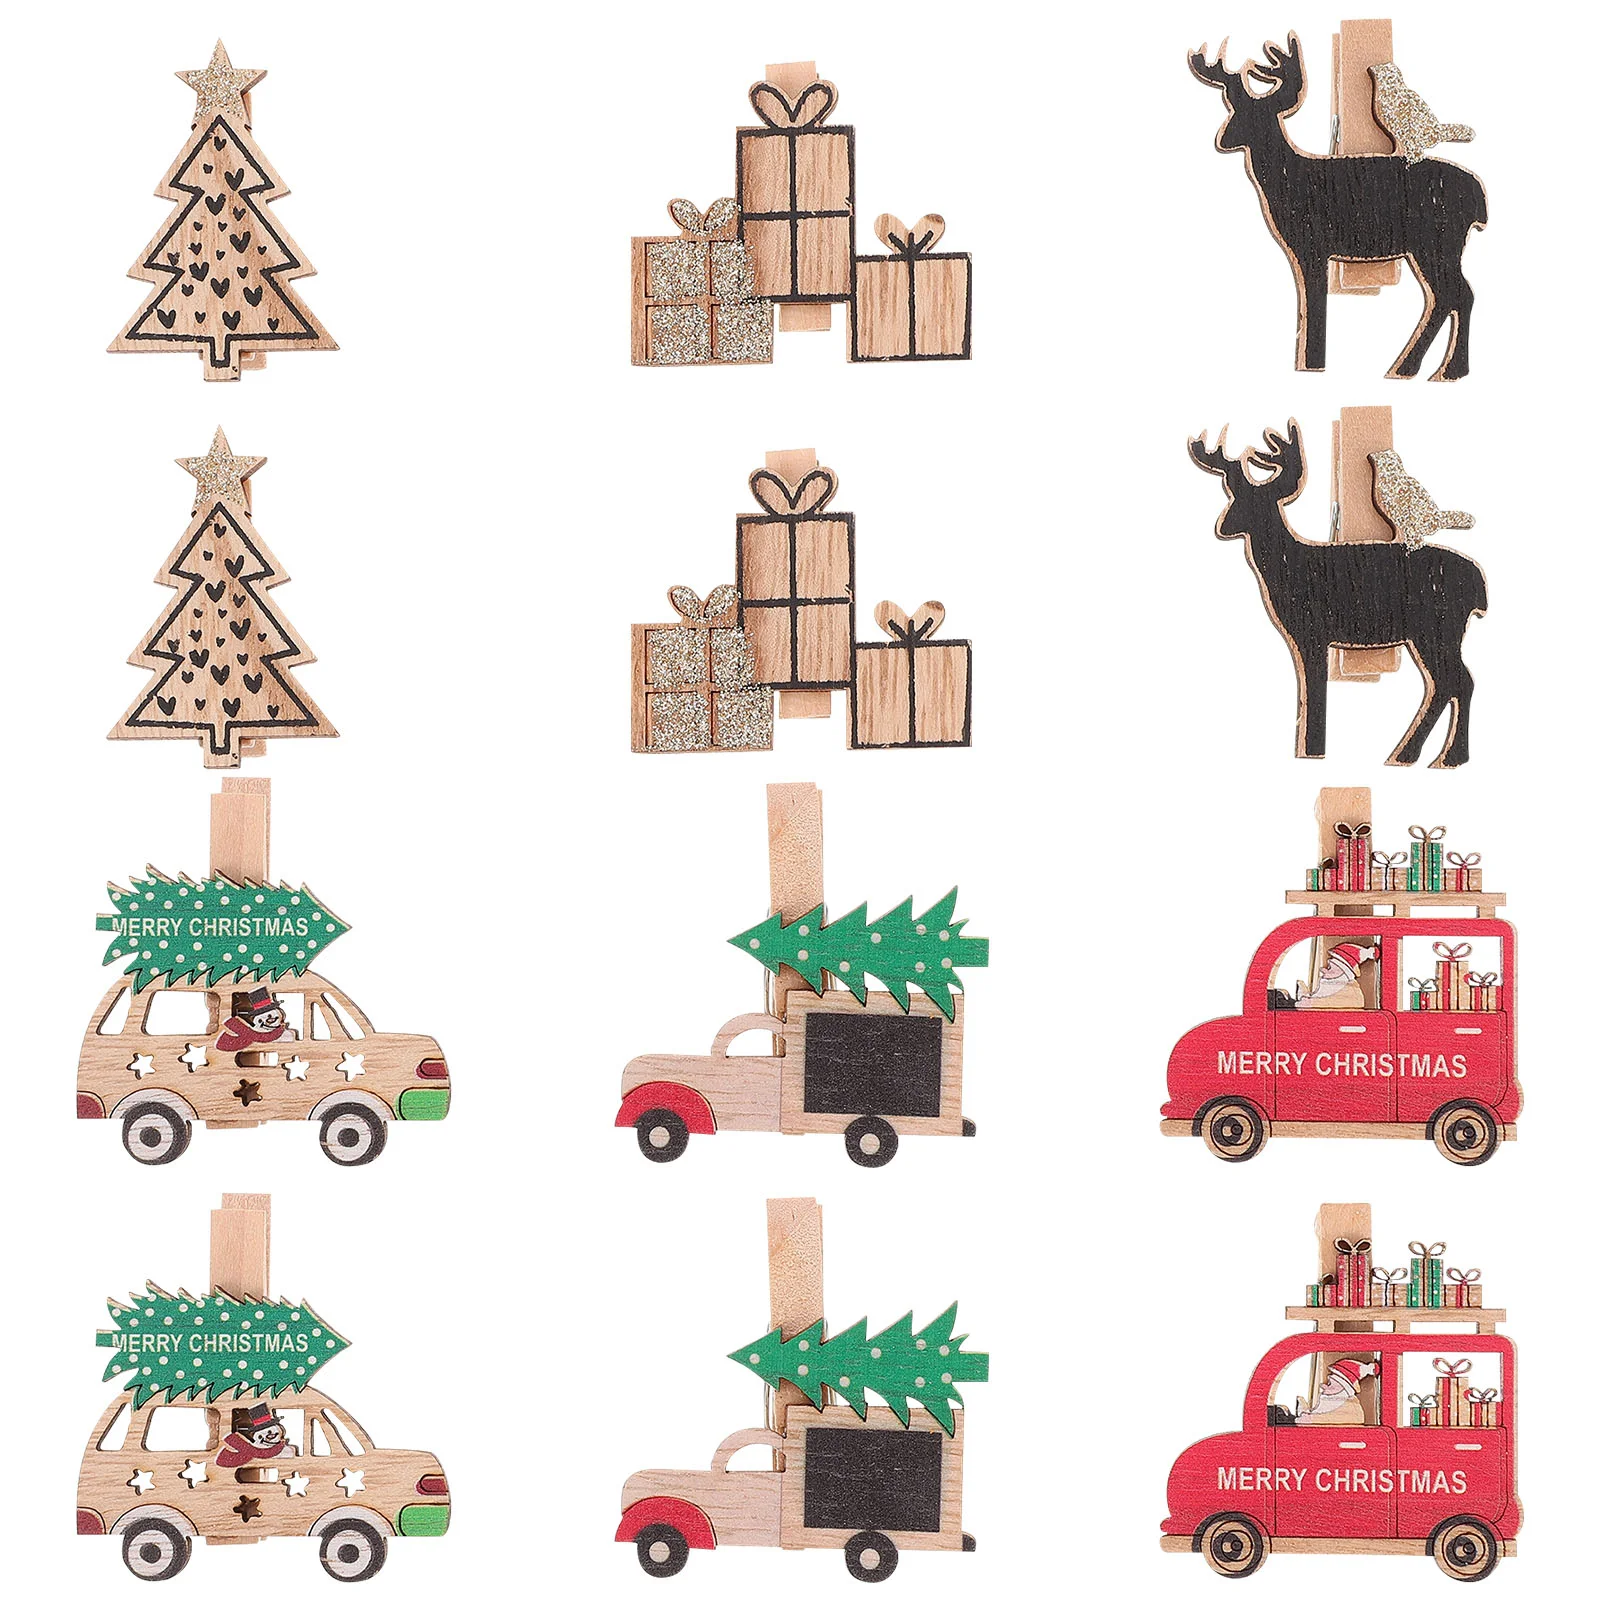 

Clip Wood Photo Clips Christmas Pegs Peg Clothes Mini Tree Wooden Craft Wall Diy Drawings Cocktails Paper Scrapbooking